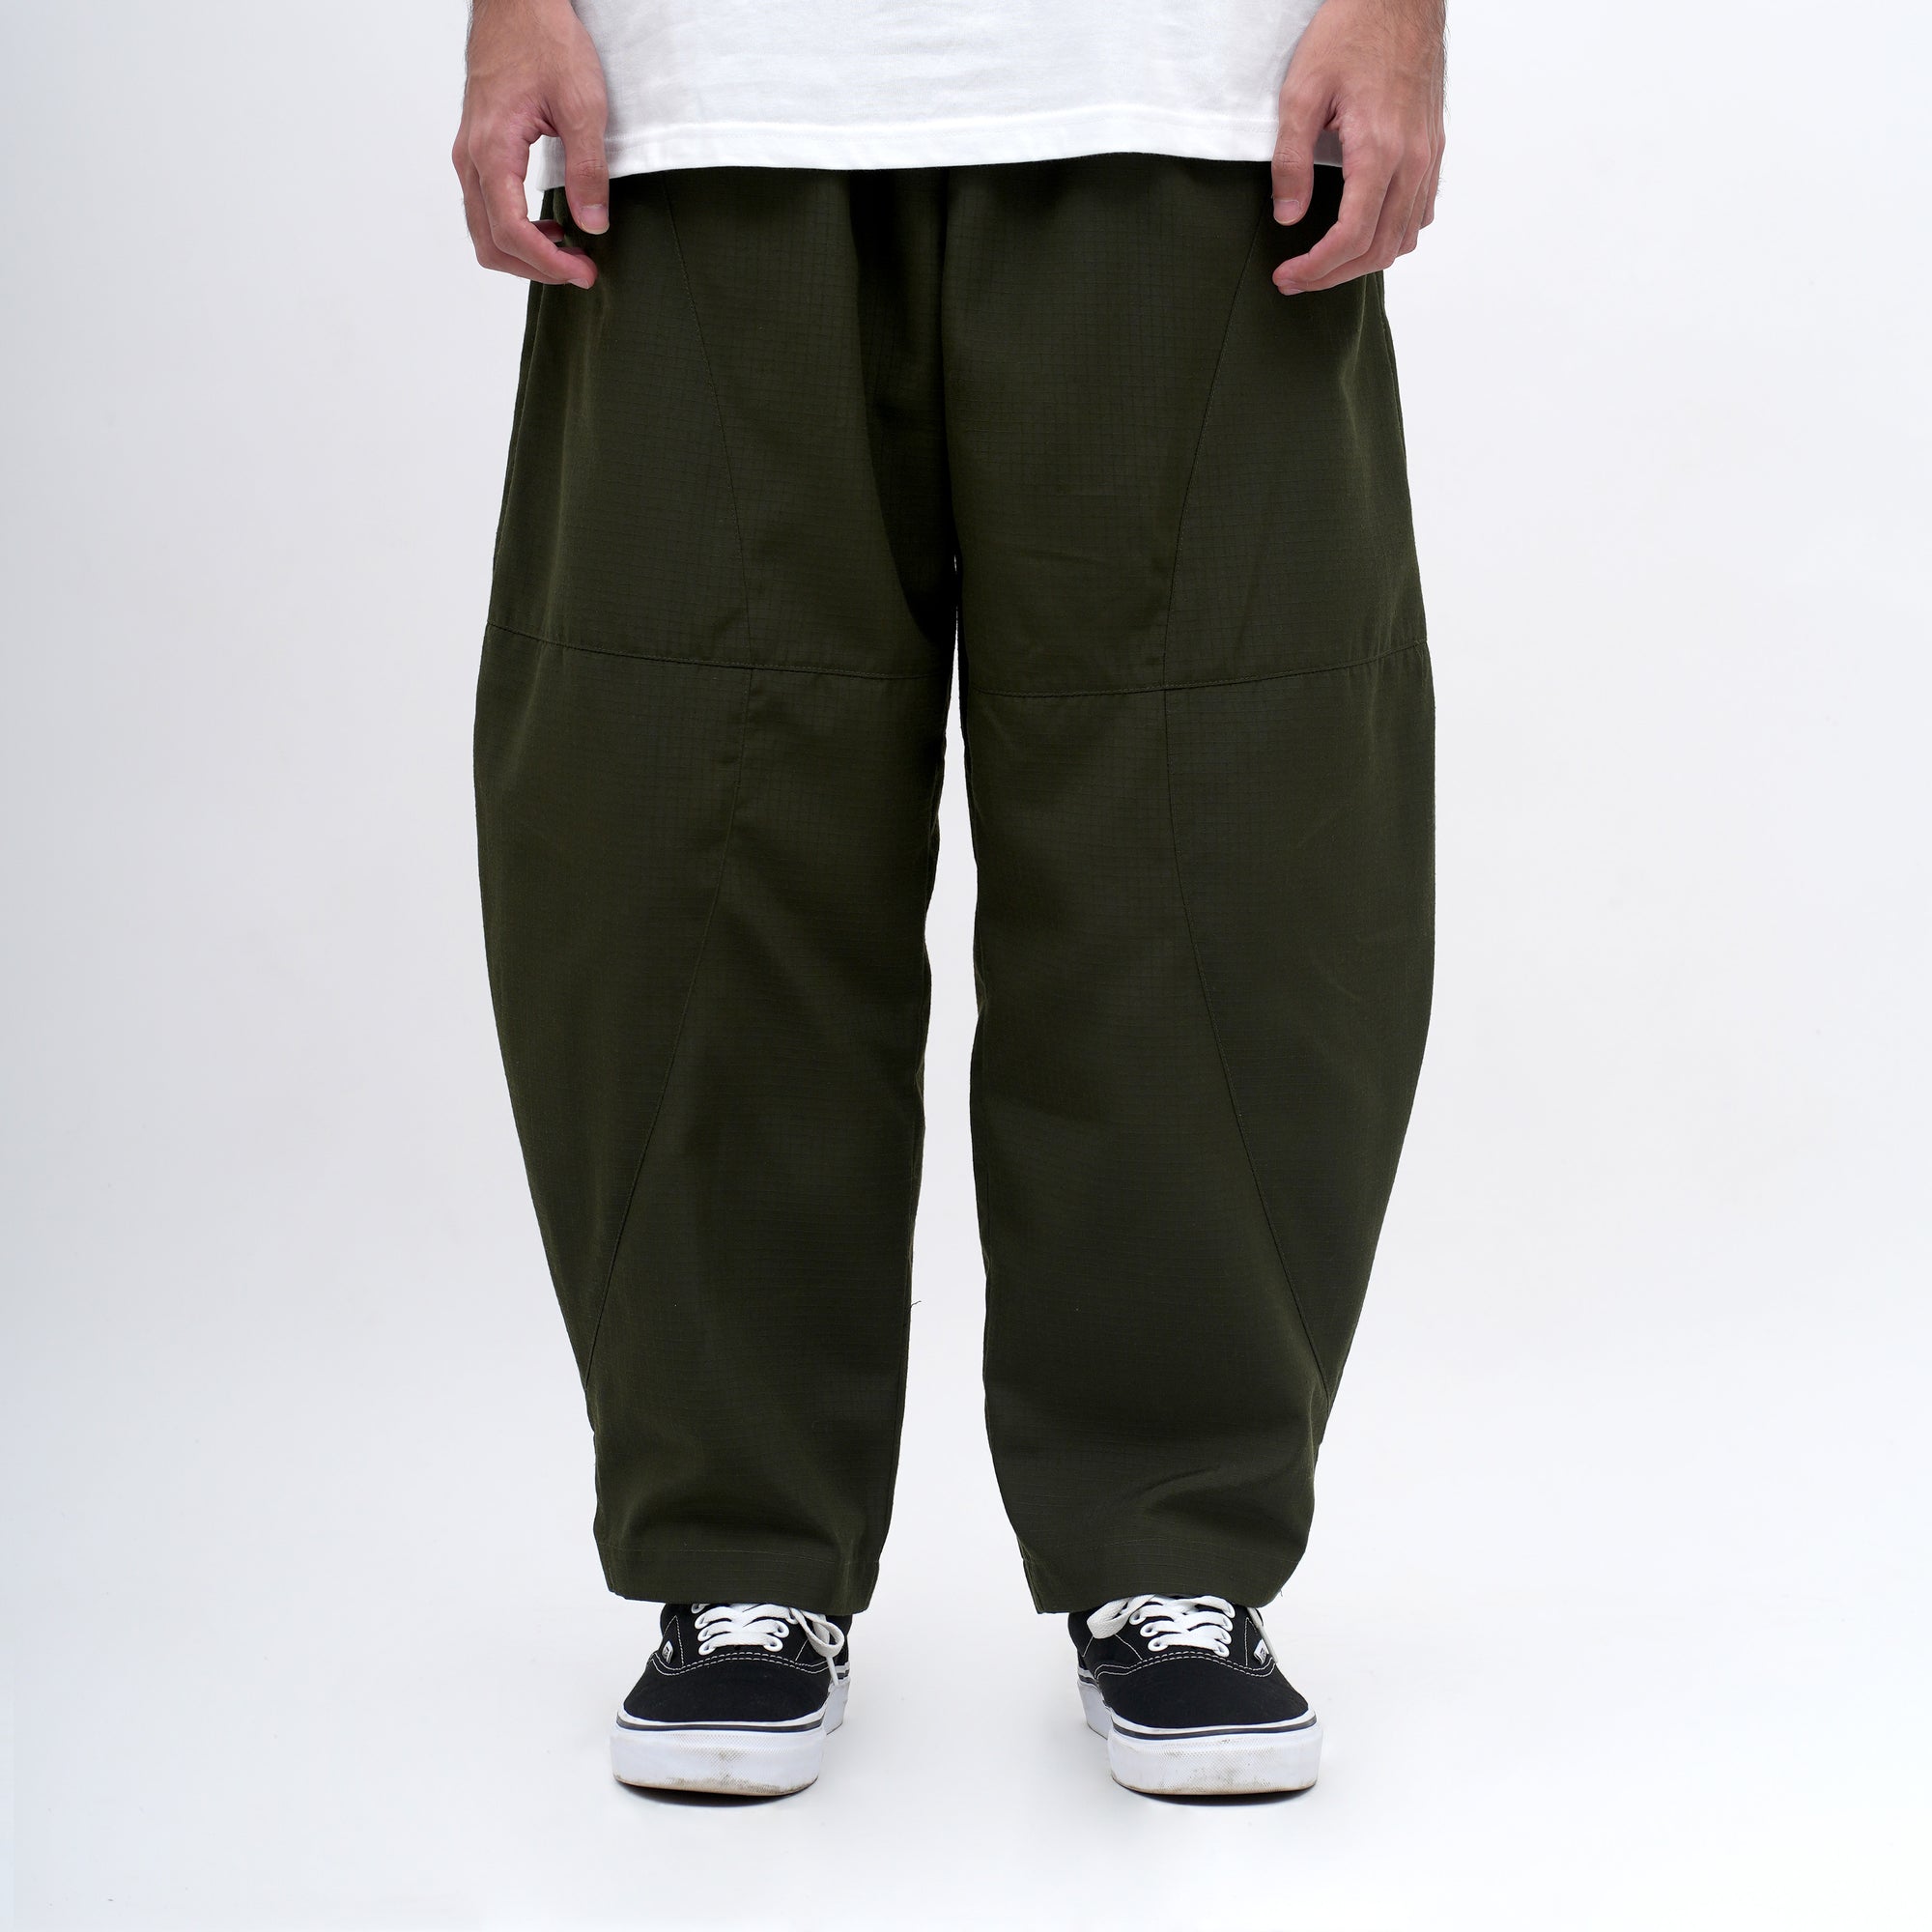 Roughneck CL004 Army Tunnel Pants